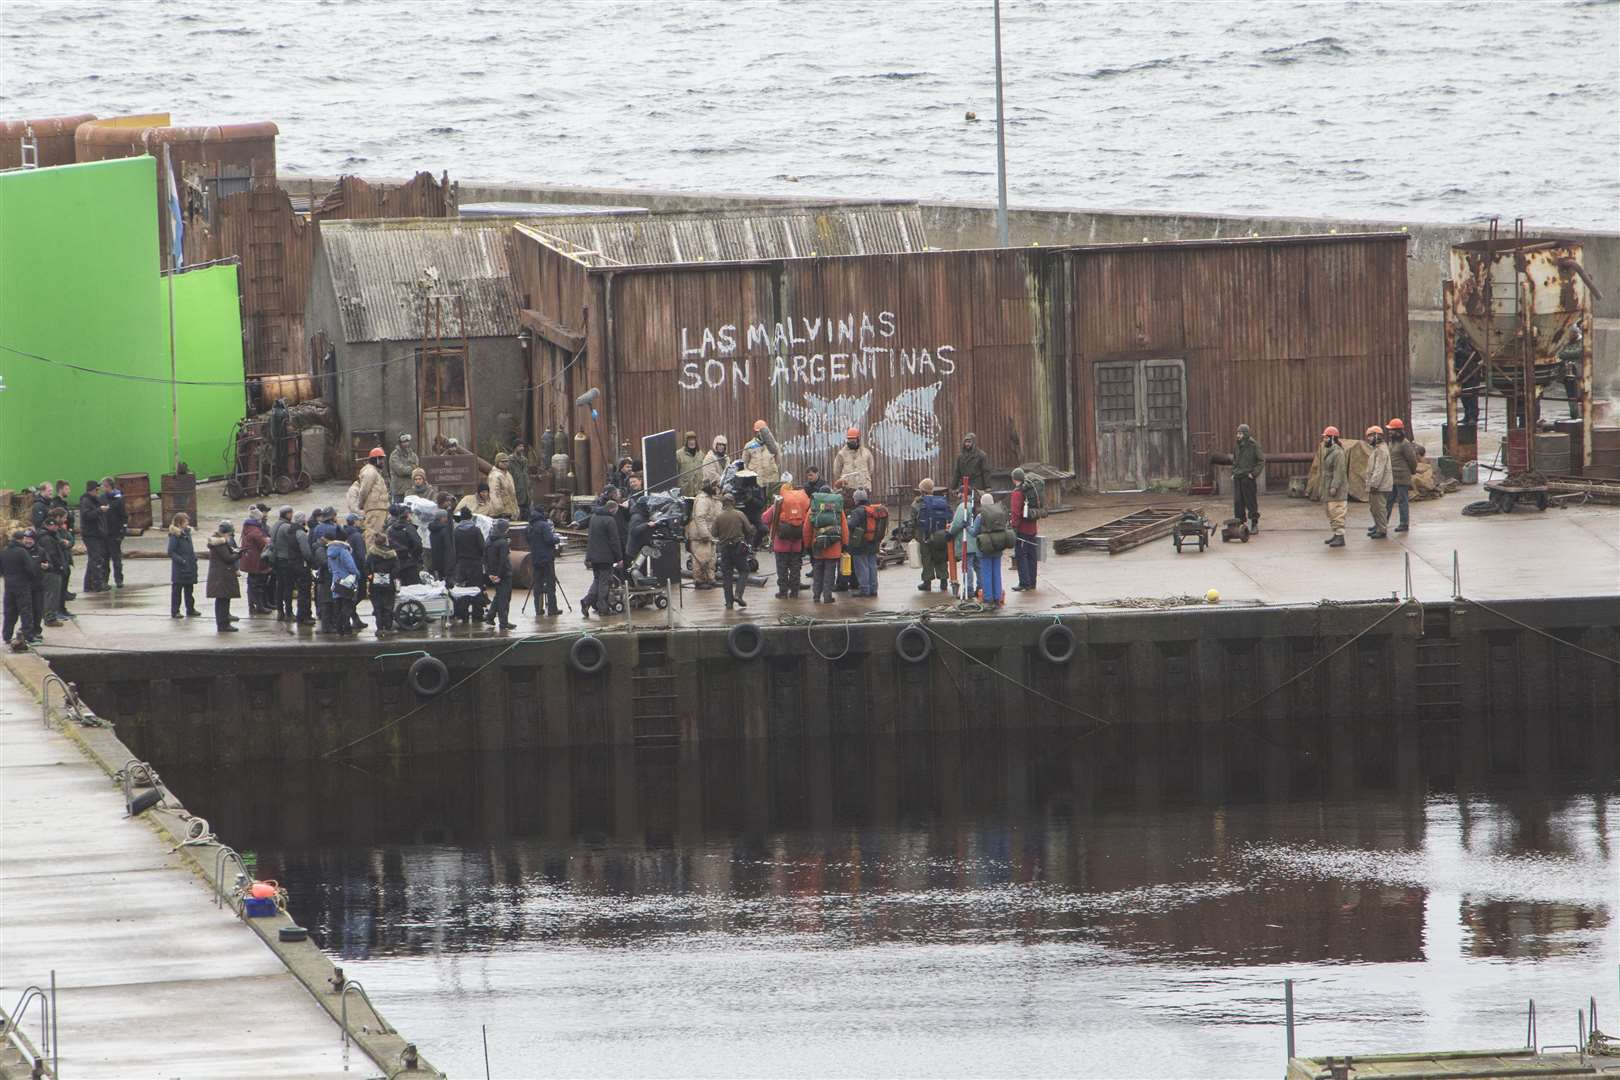 The scene at Lybster harbour on Wednesday where the Netflix drama The Crown was being filmed. Picture: Robert MacDonald / Northern Studios